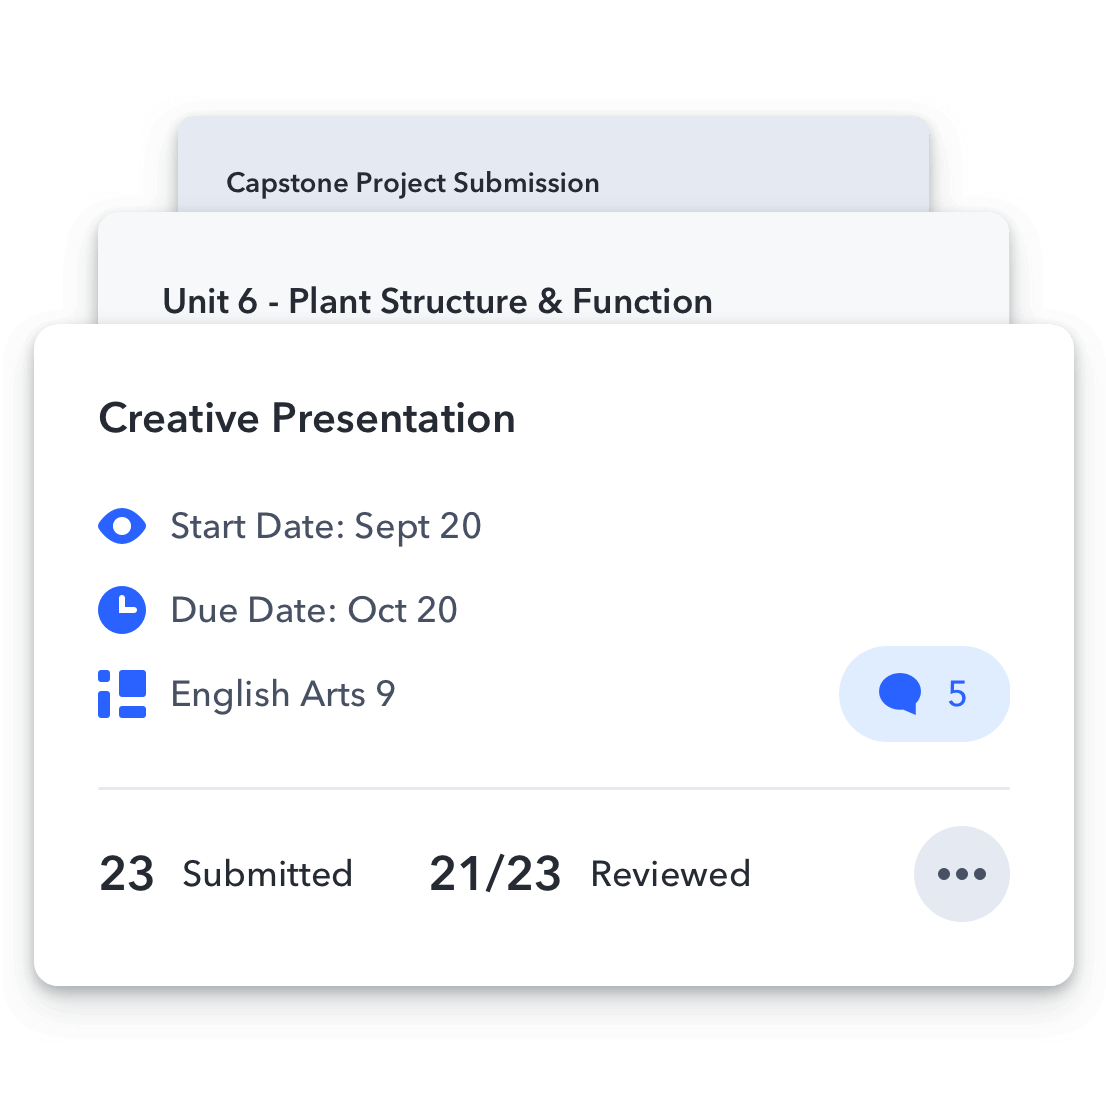 An example Activity named “Creative Presentation”, with details on start and due dates, chat messages, and an overview of the number of submitted and reviewed work.